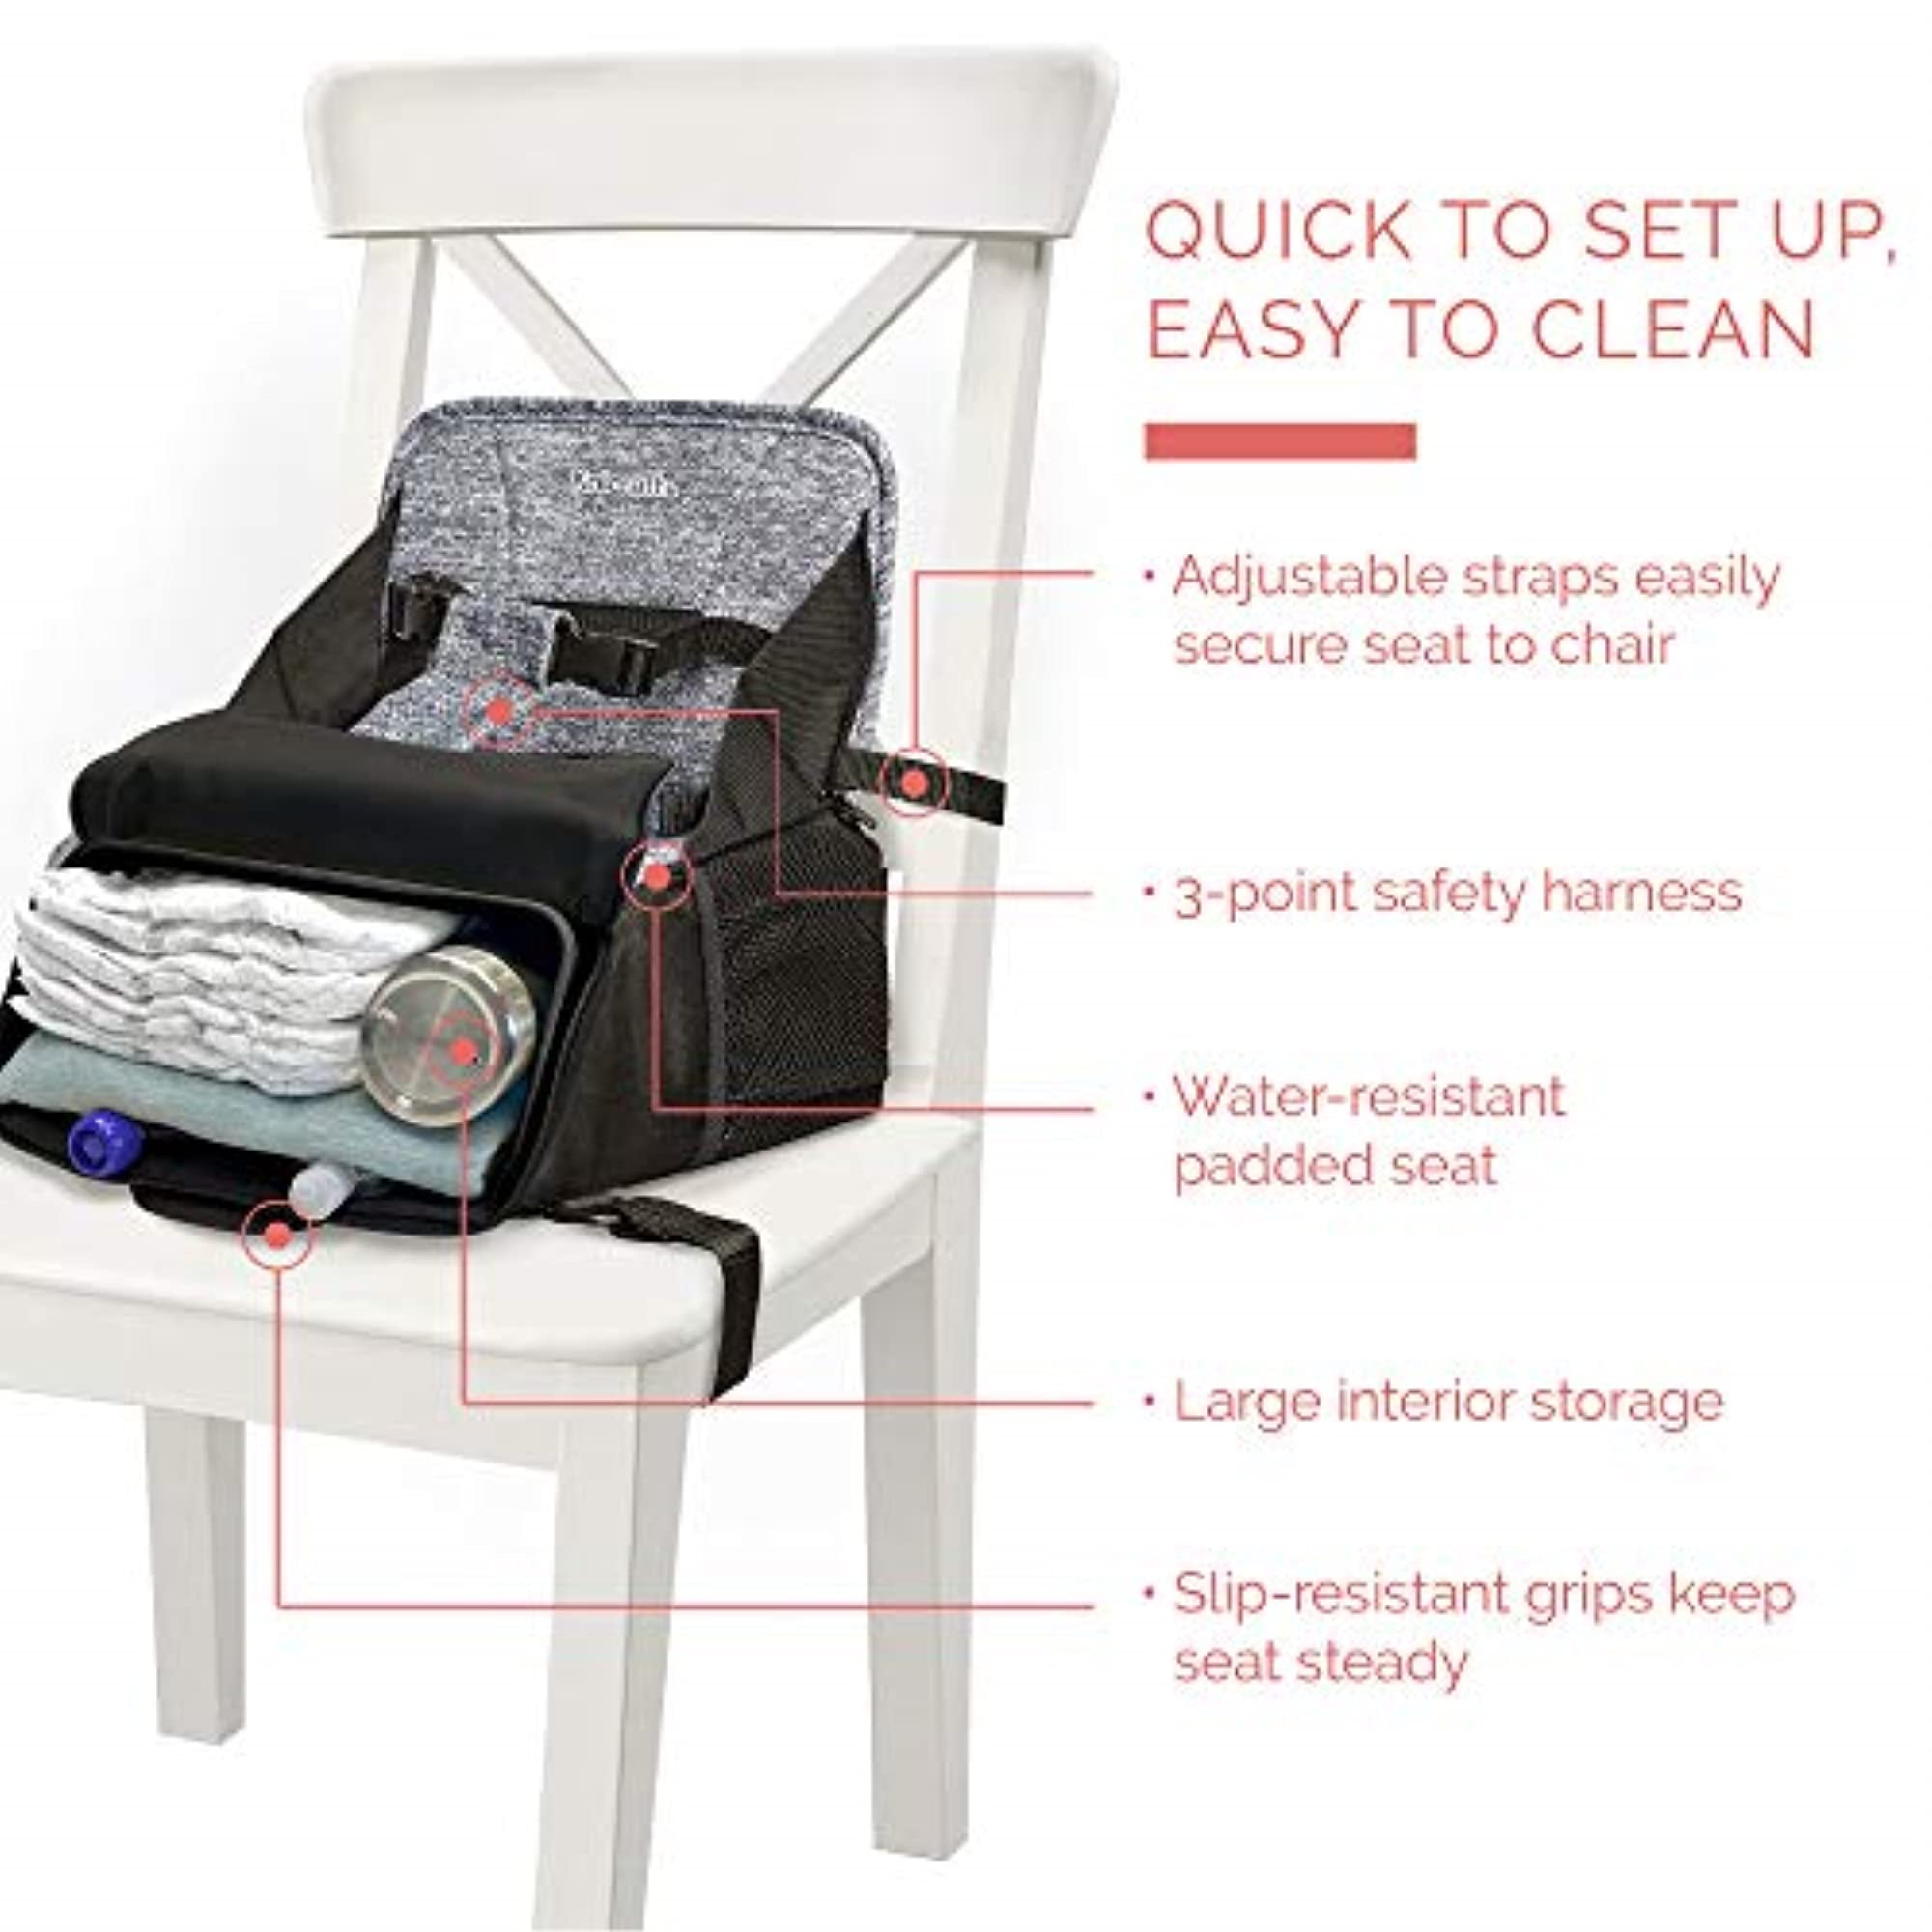 Kolcraft Travel Duo 2-in-1 Portable Booster Seat and Diaper Bag - Space Grey